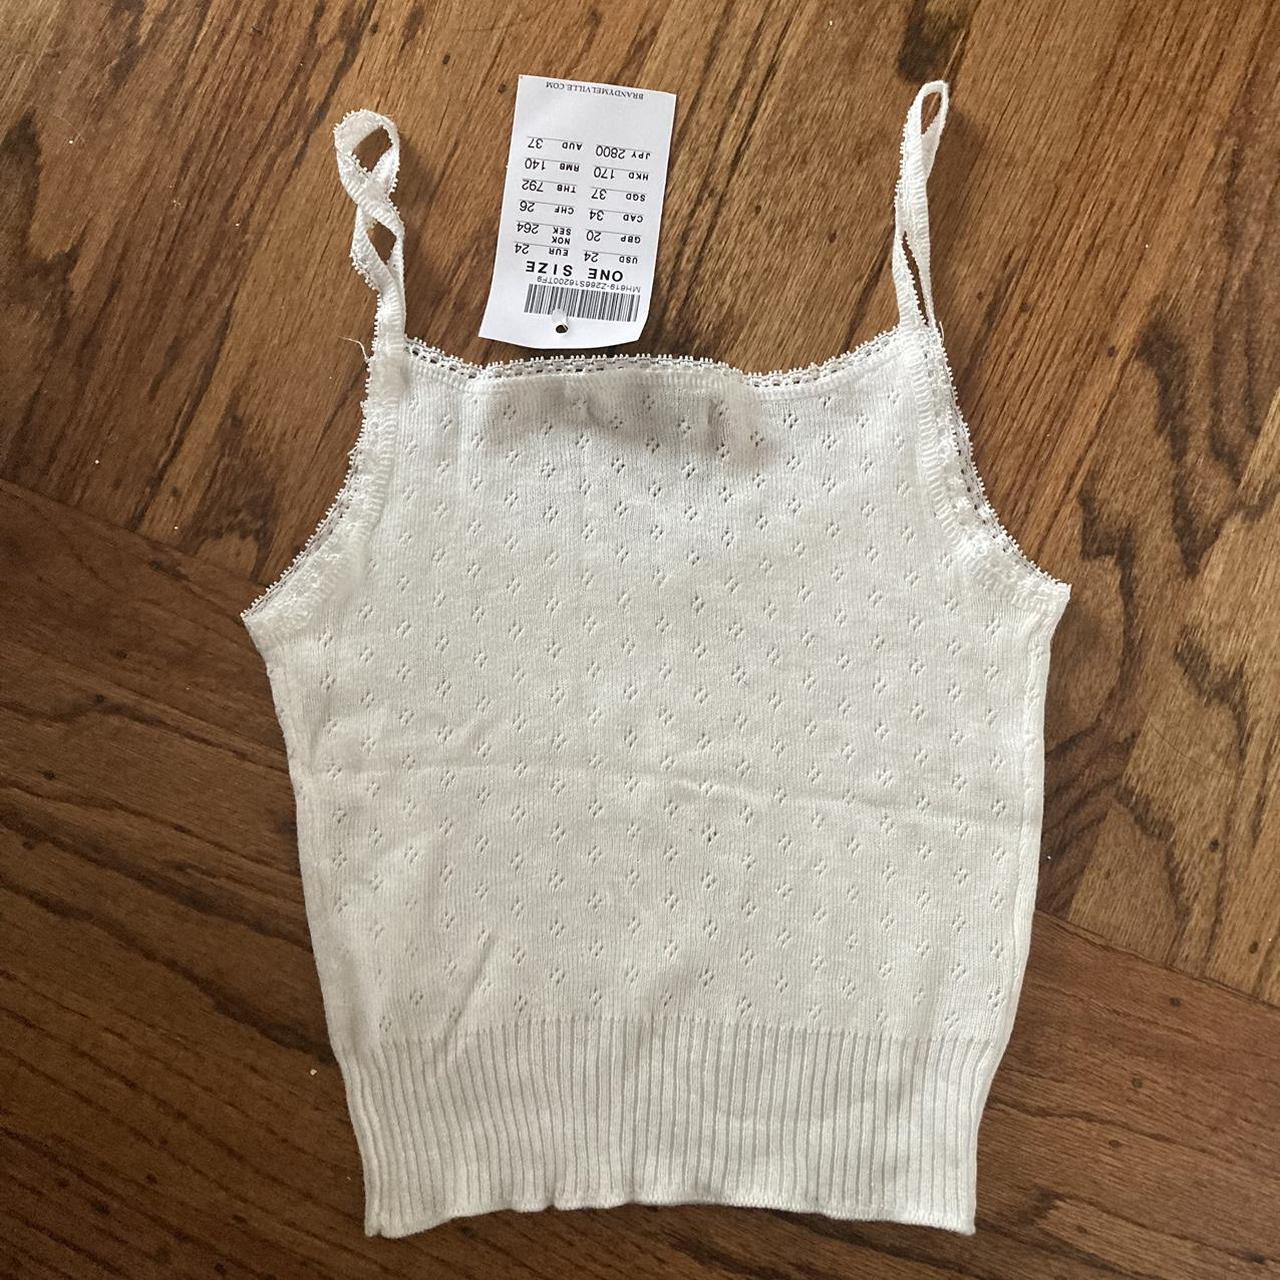 Brandy Melville Black Tank Top SMALL, Women's Fashion, Clothes on Carousell